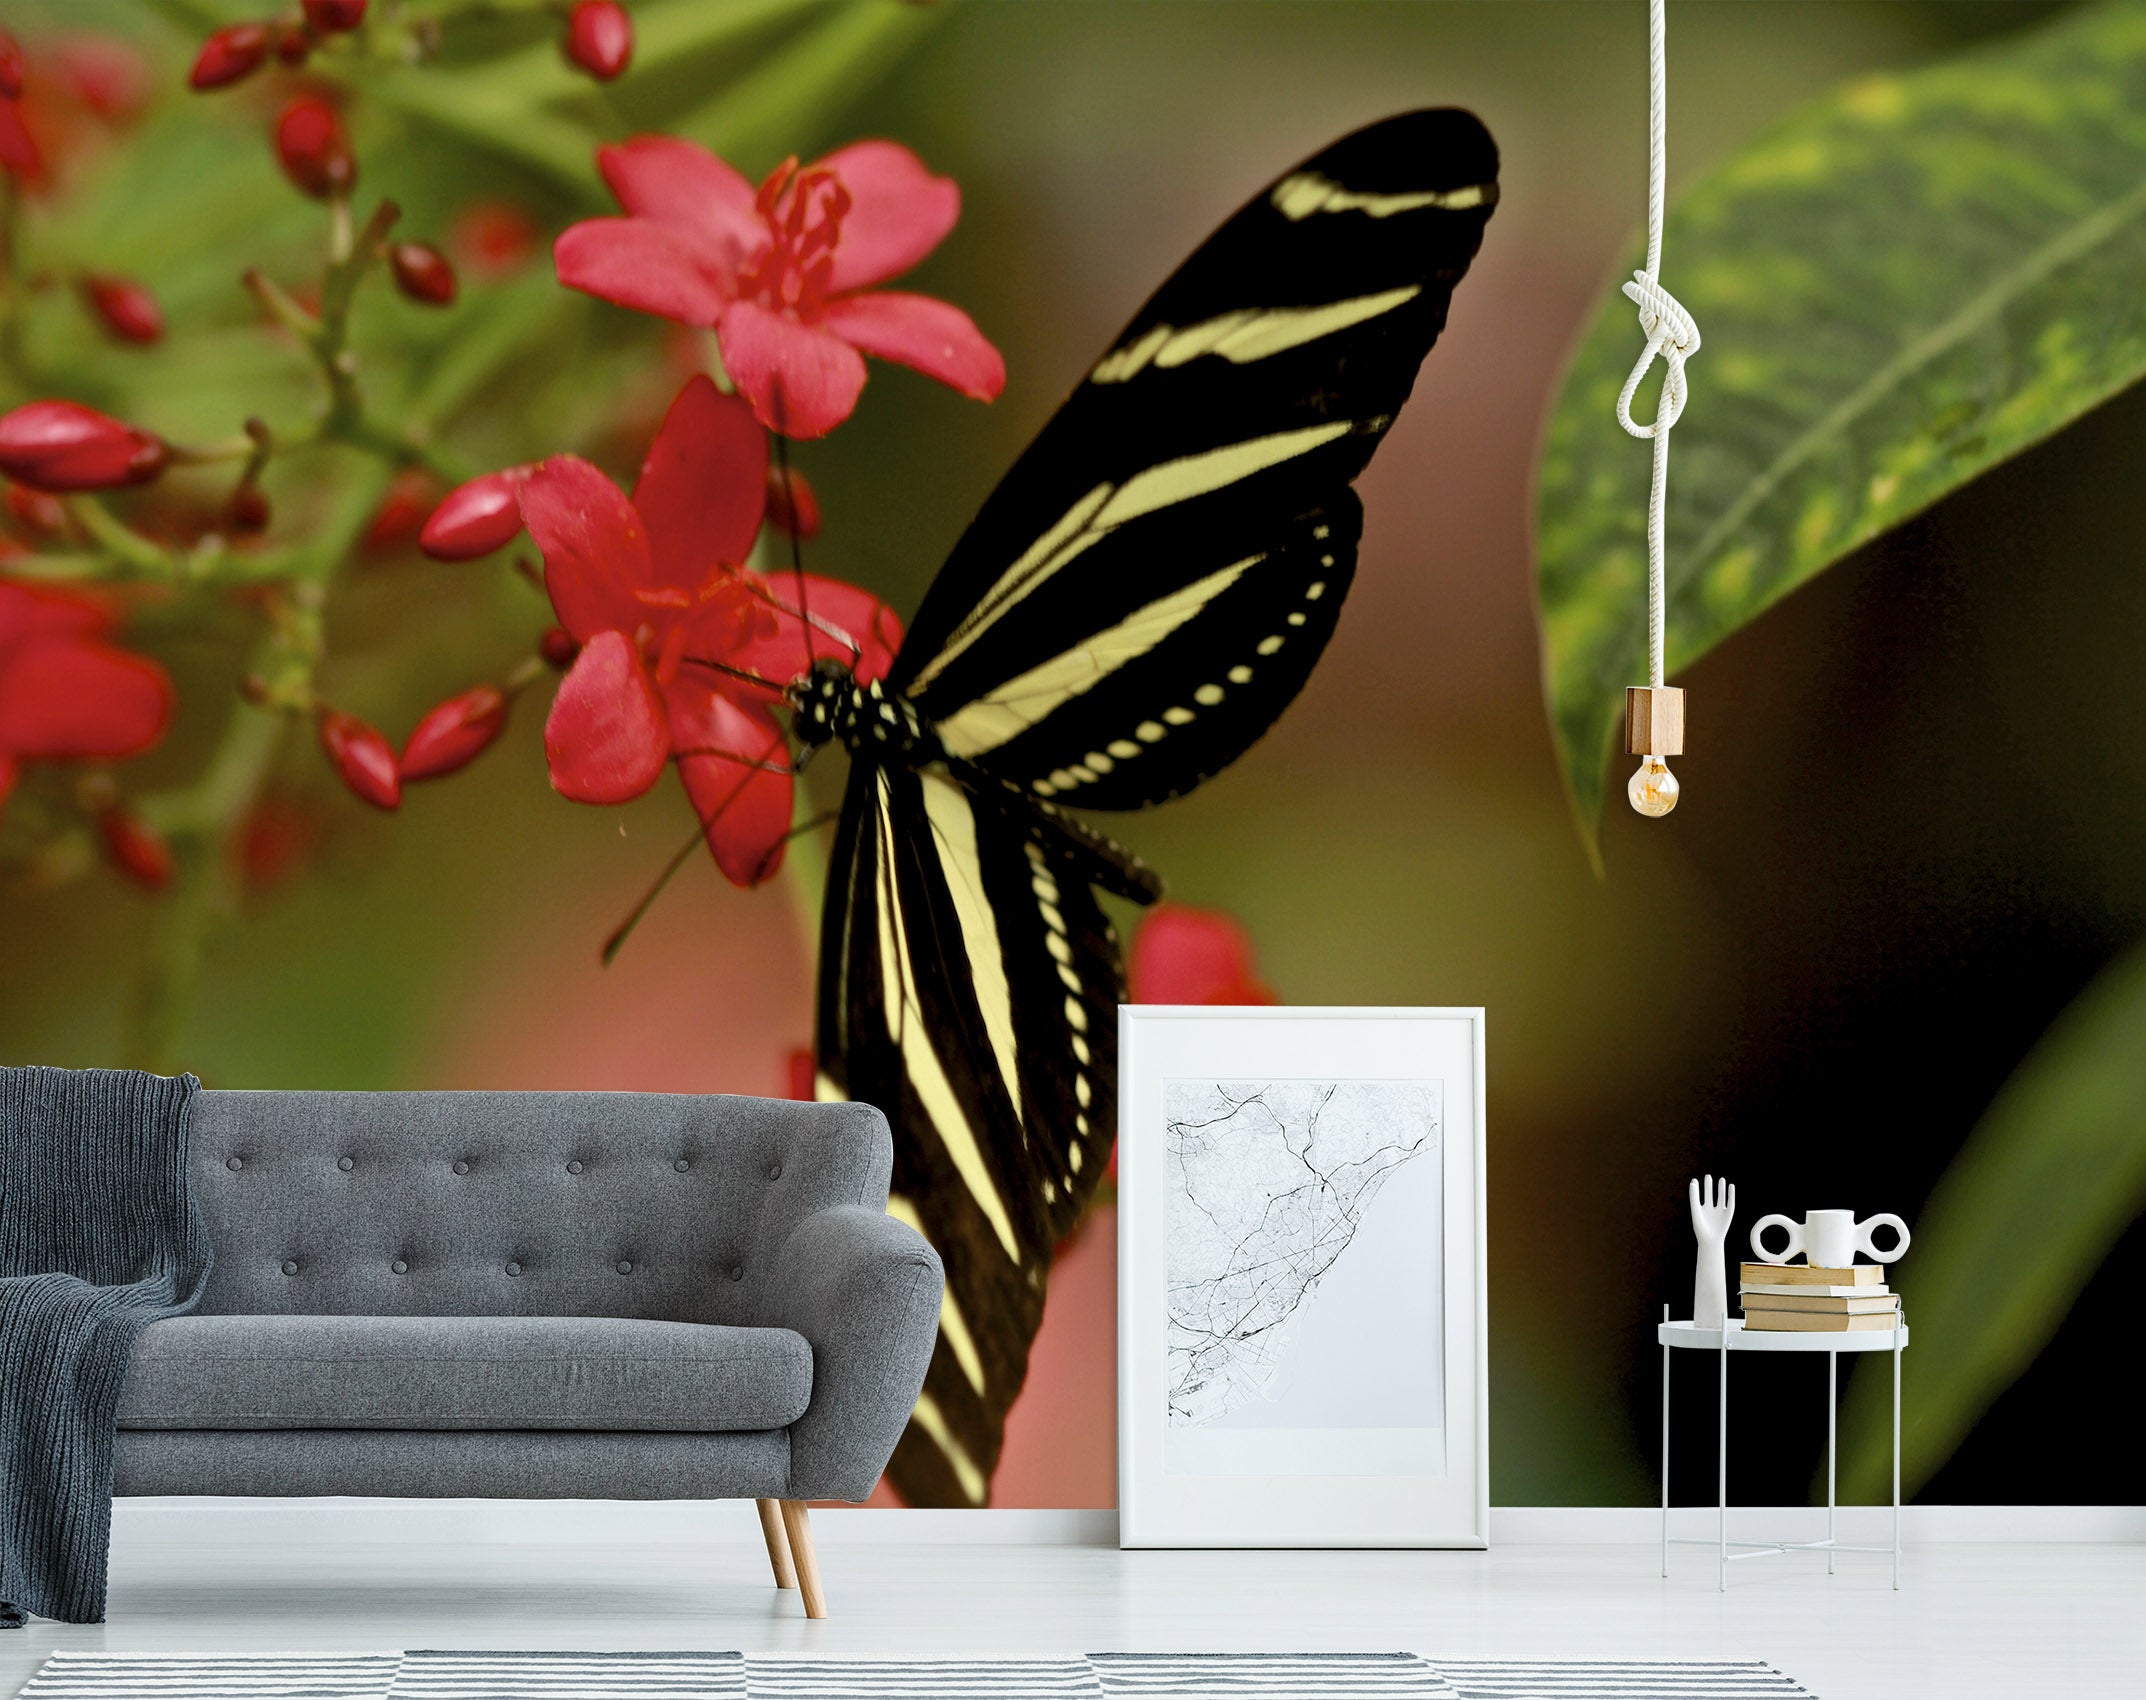 3D Butterfly Collecting Honey 133 Kathy Barefield Wall Mural Wall Murals